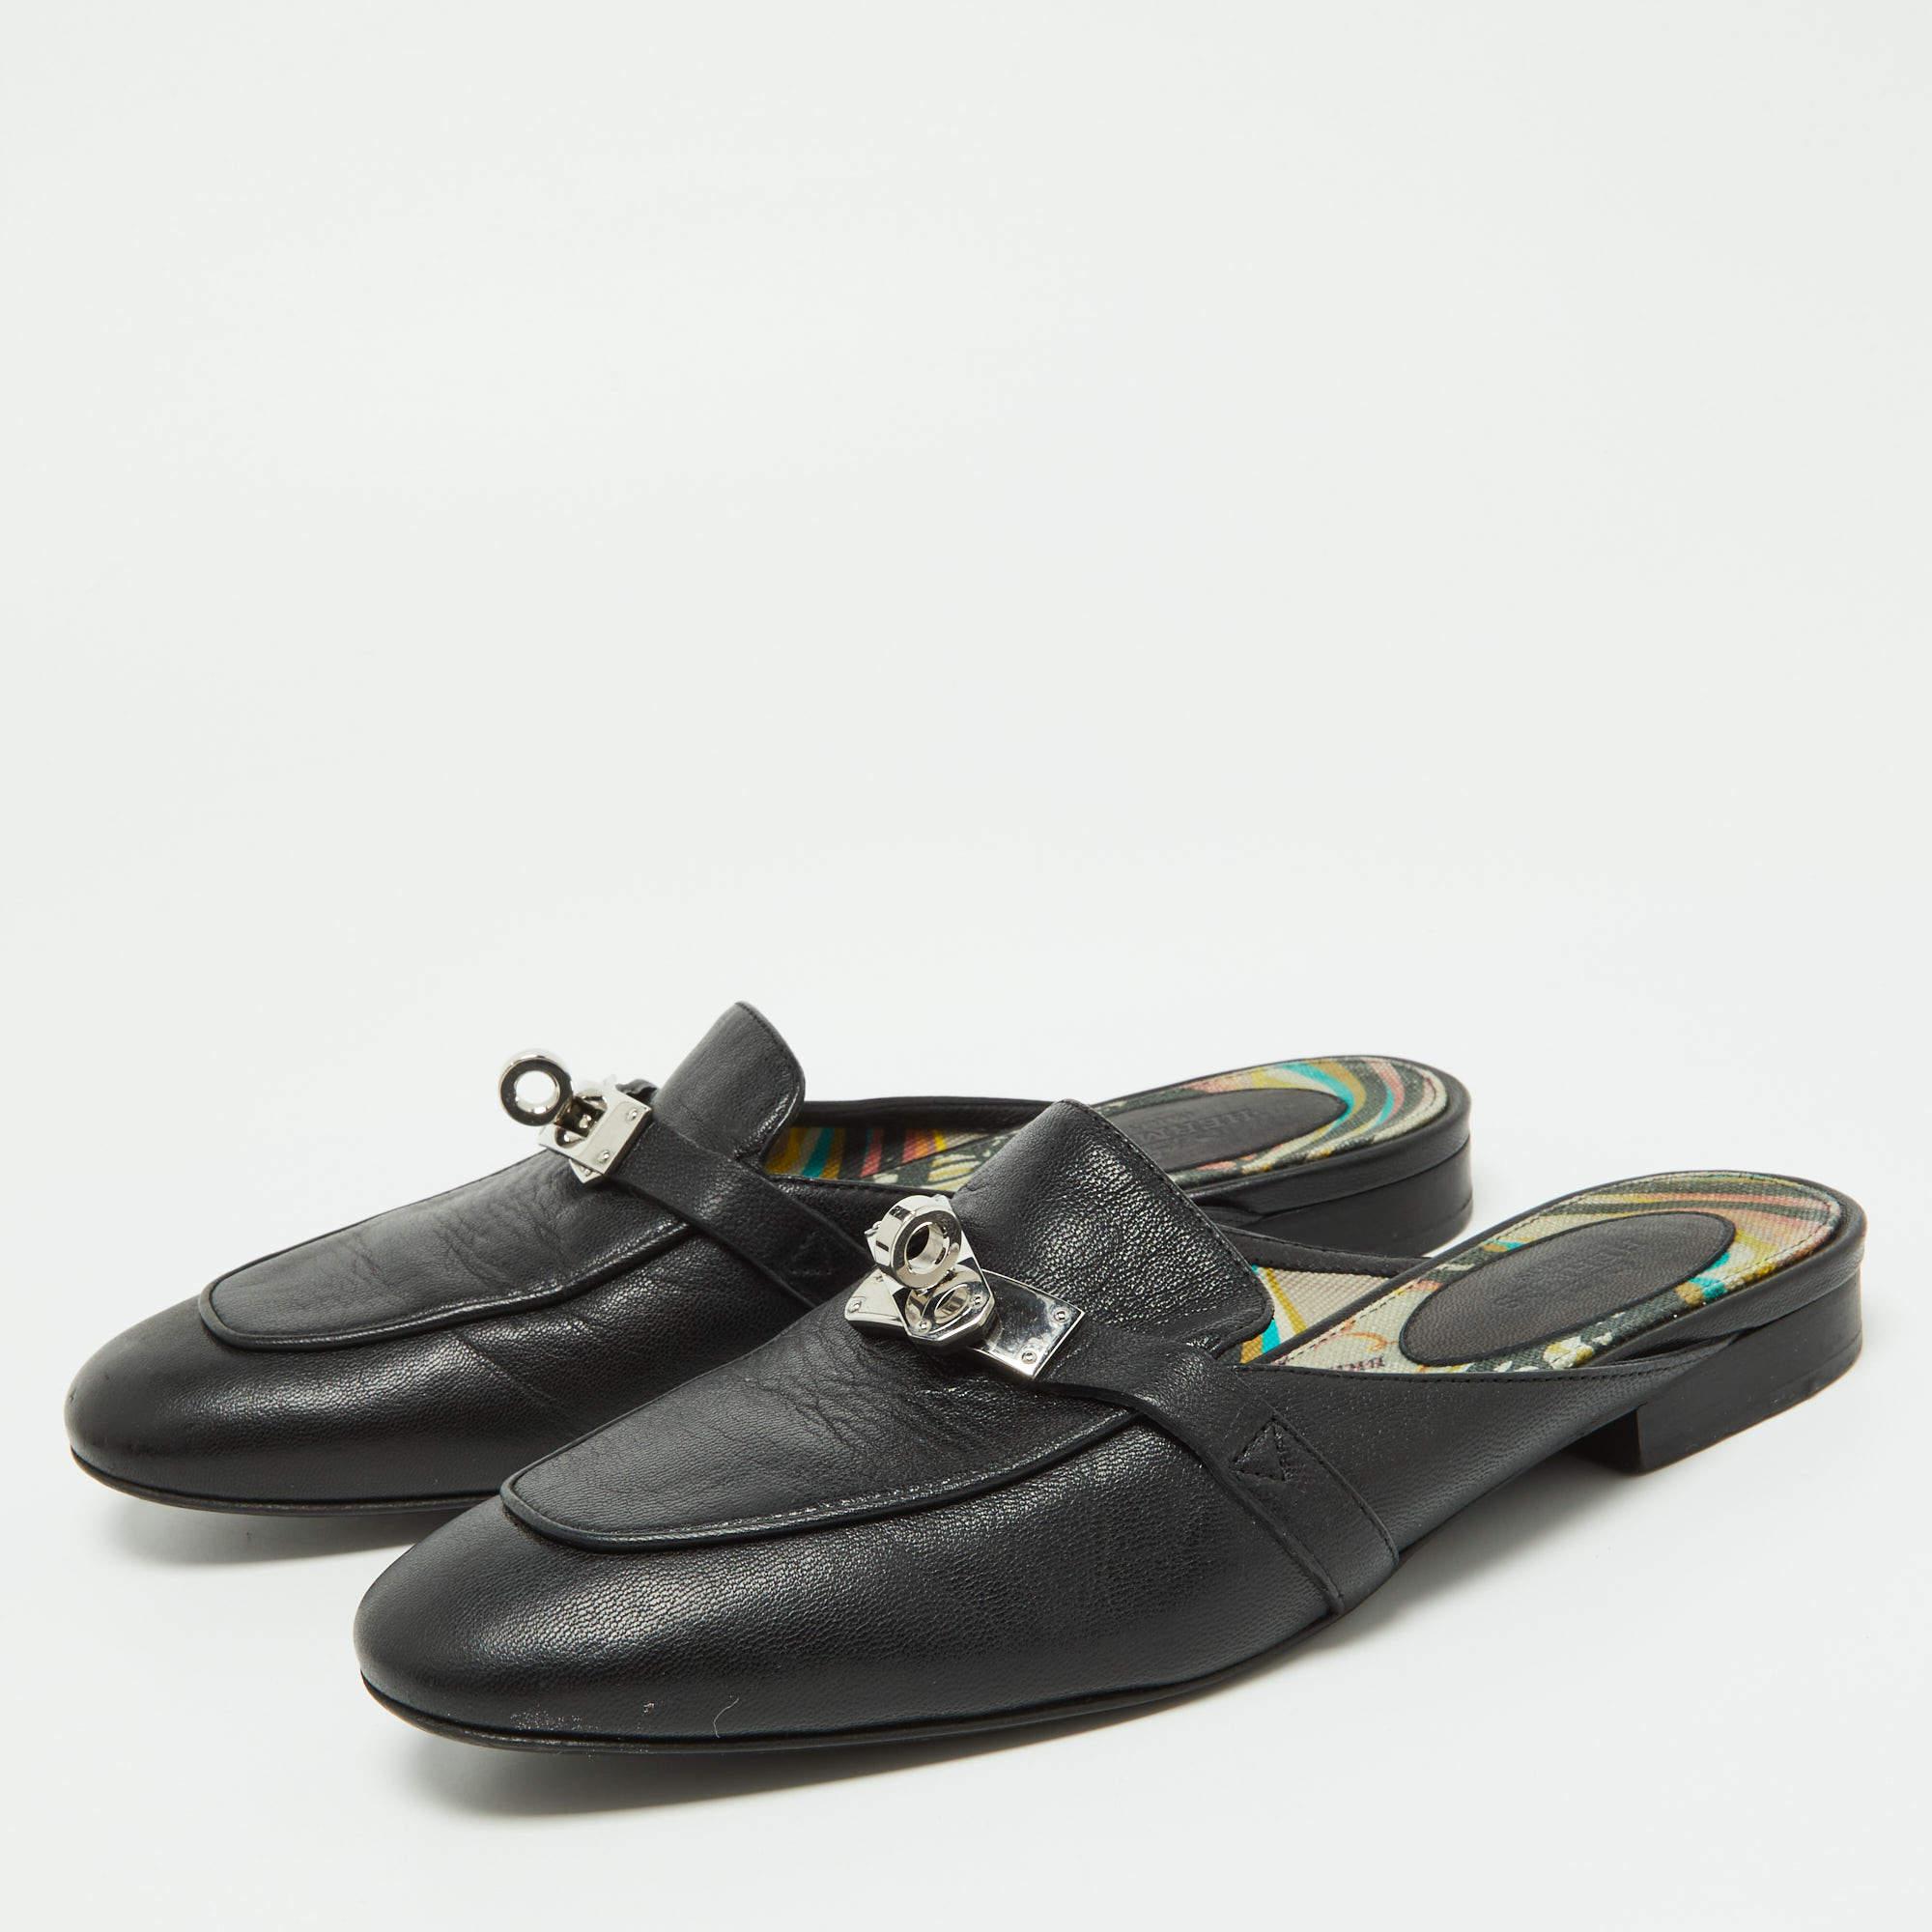 Give your outfit a luxe update with this pair of Hermes mules. The shoes are sewn perfectly to help you make a statement in them for a long time.

